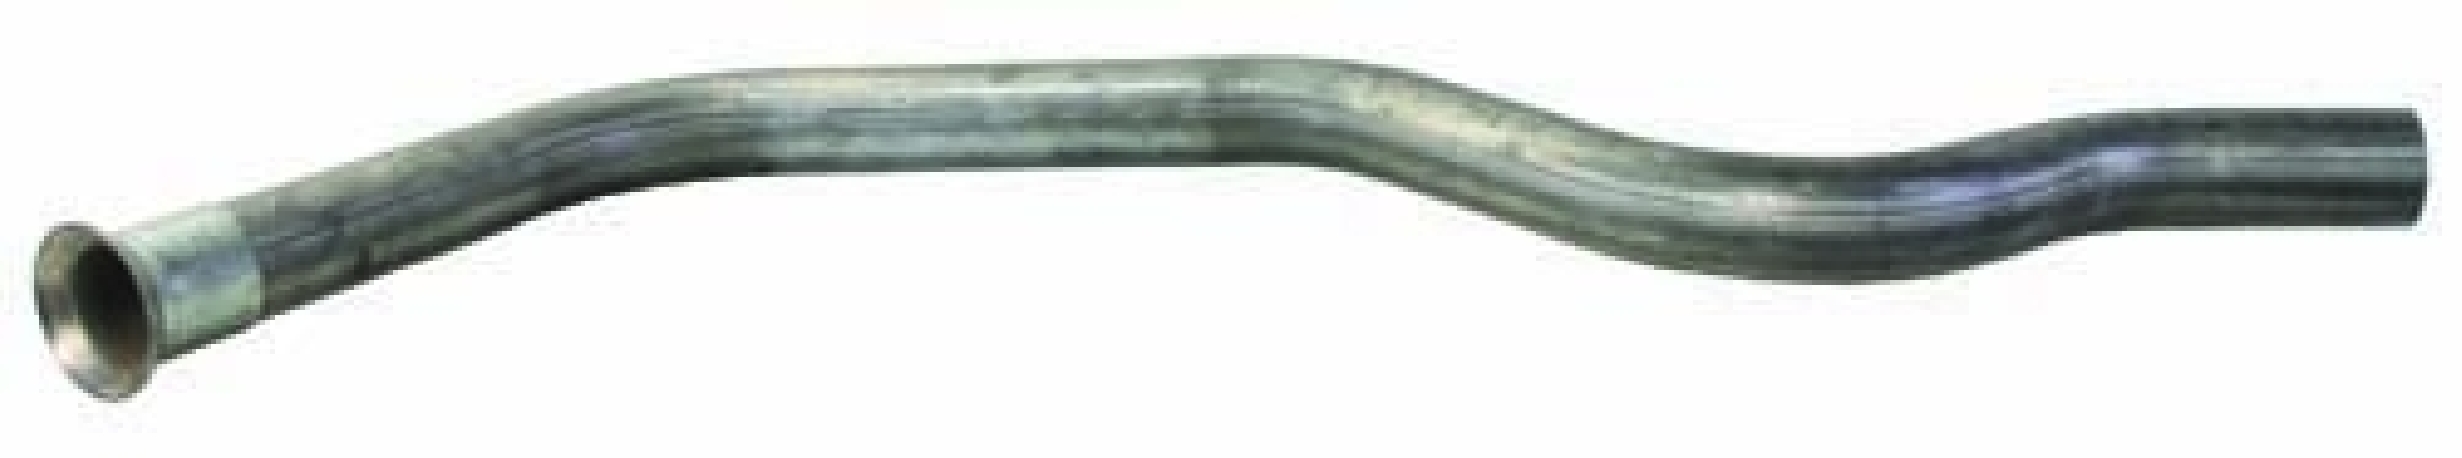 Front Exhaust Pipe, 1.05-1.3, Mk2 Golf 86-92